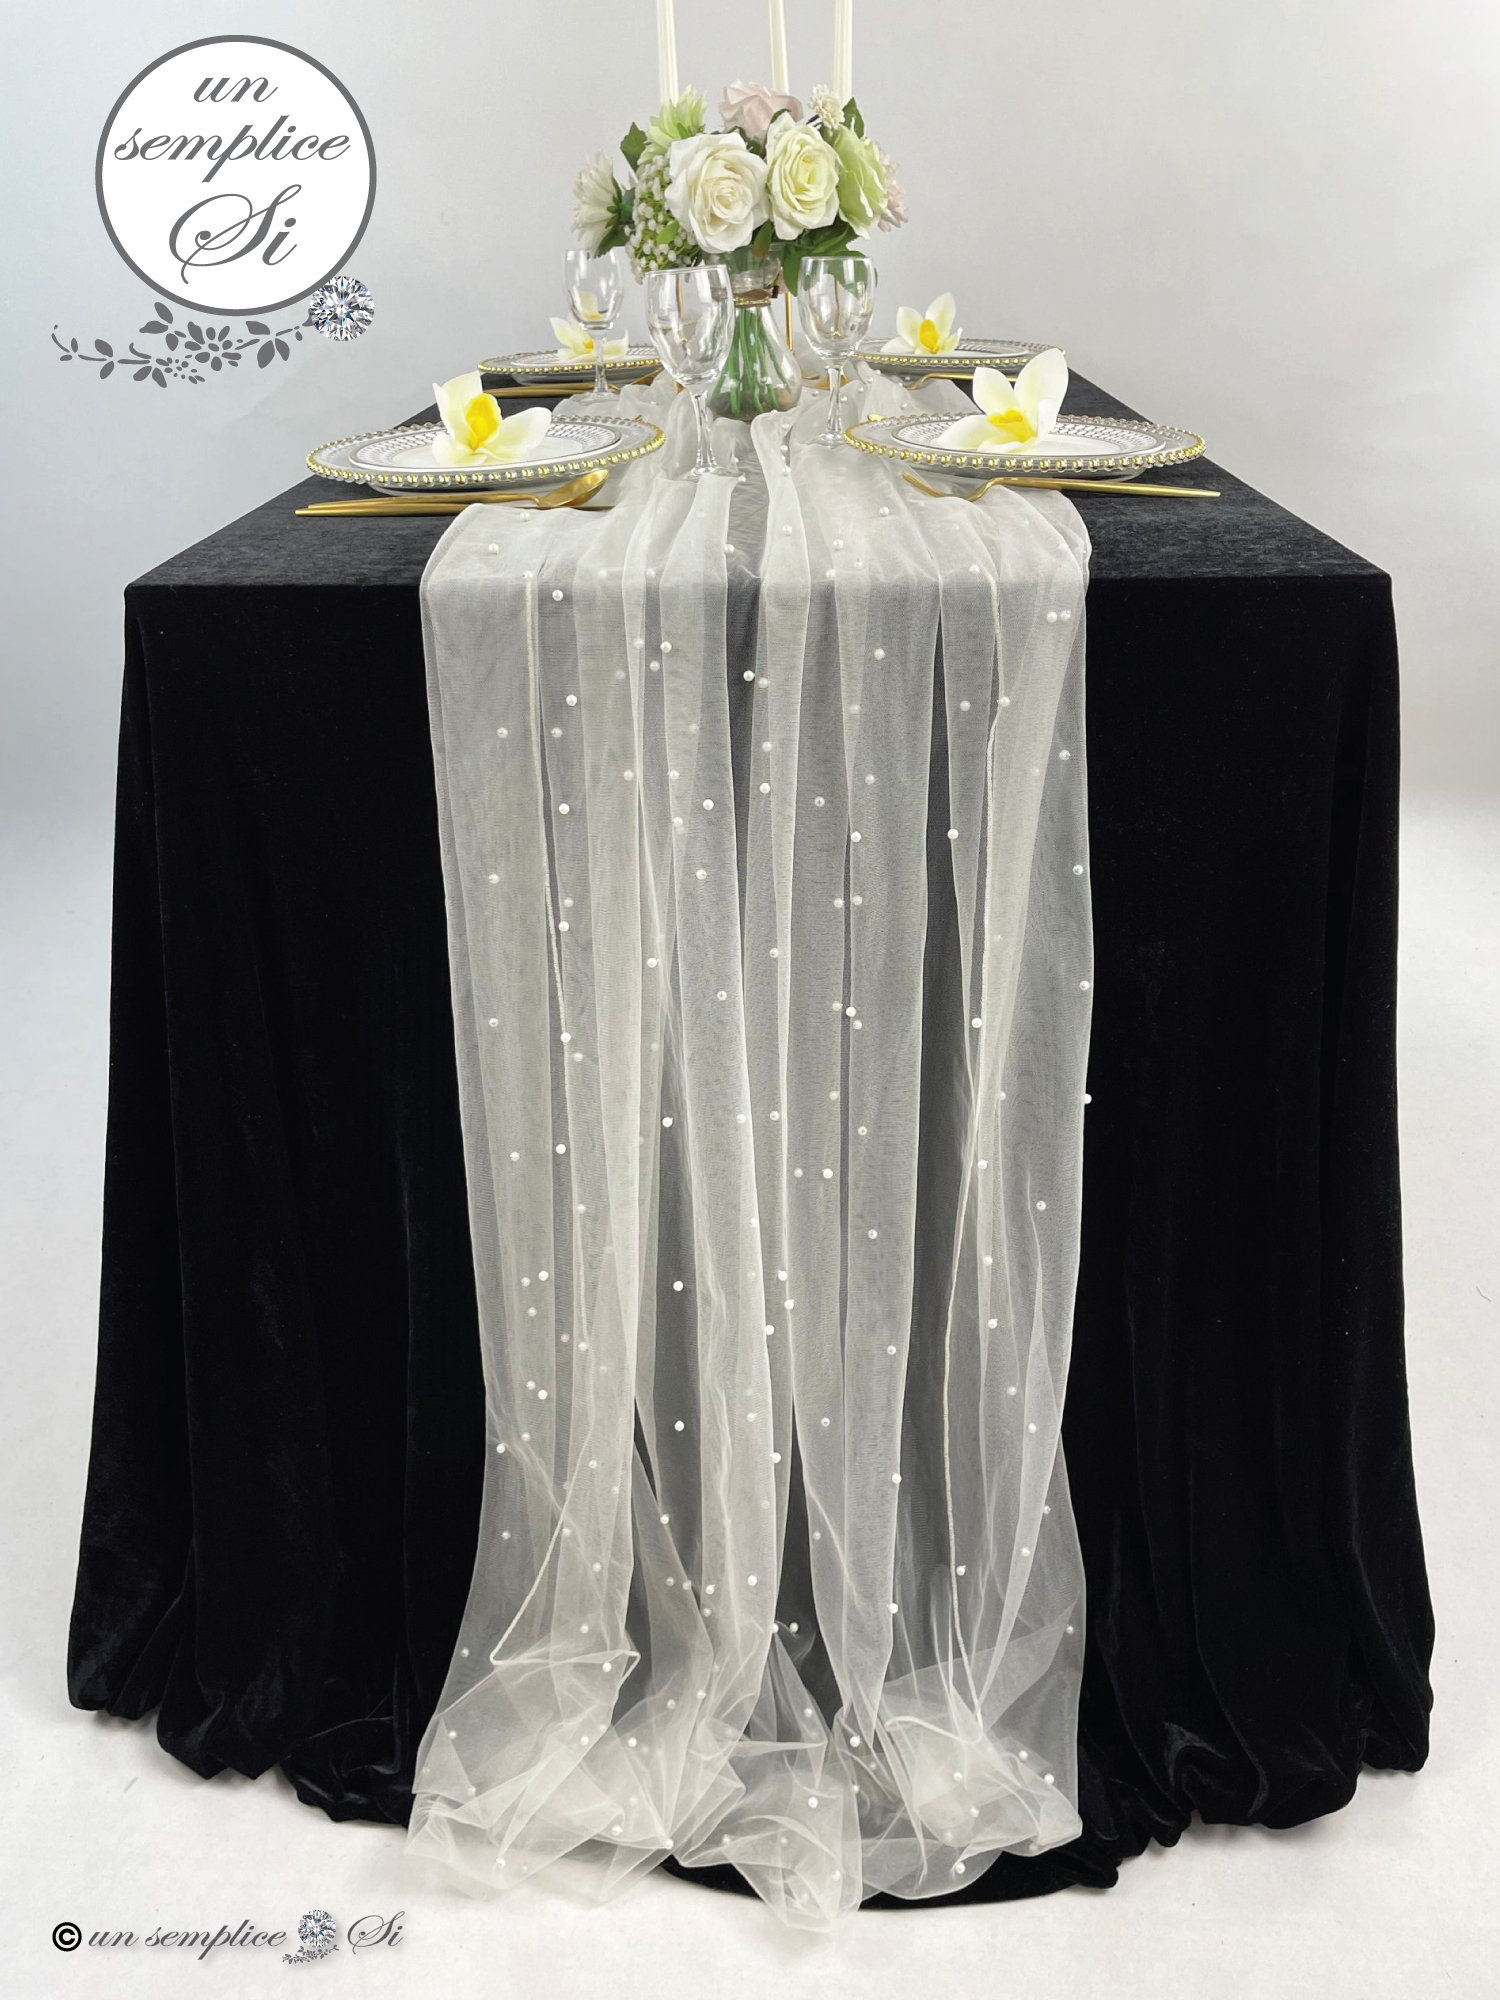 Preboun 6 Pcs Pearl Tablecloth Bulk 63 x 118 Inches Wedding Table Runner  Pearl Veil Lace Tulle Fabrics for Wedding Ceremony Party Reception Bridal